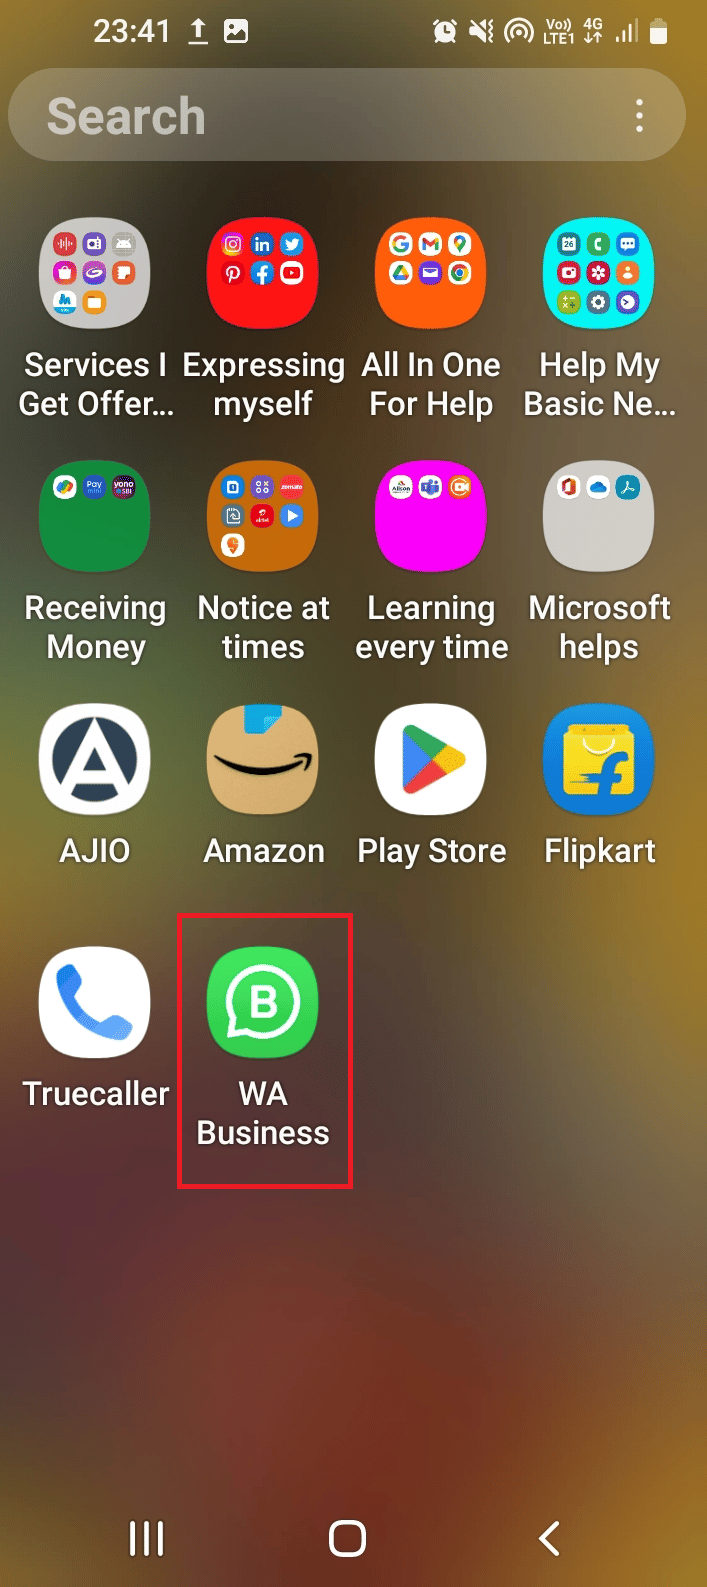 Open the home menu and tap on WhatsApp